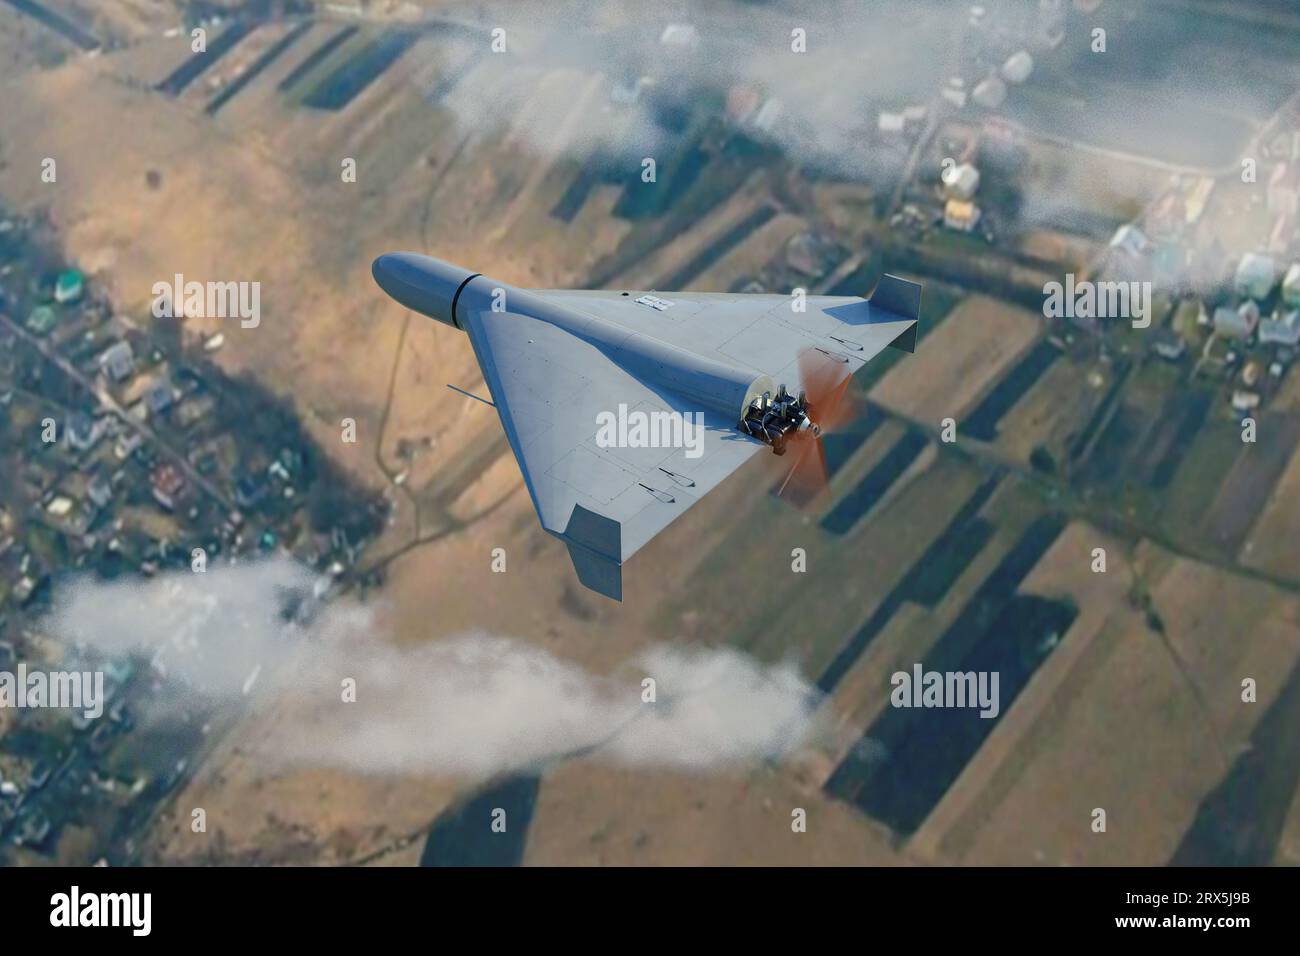 Military kamikaze drone Shahed flying in the clouds over rural landscape, Iranian combat drone in the sky, war in Ukraine, 3d render. Stock Photo